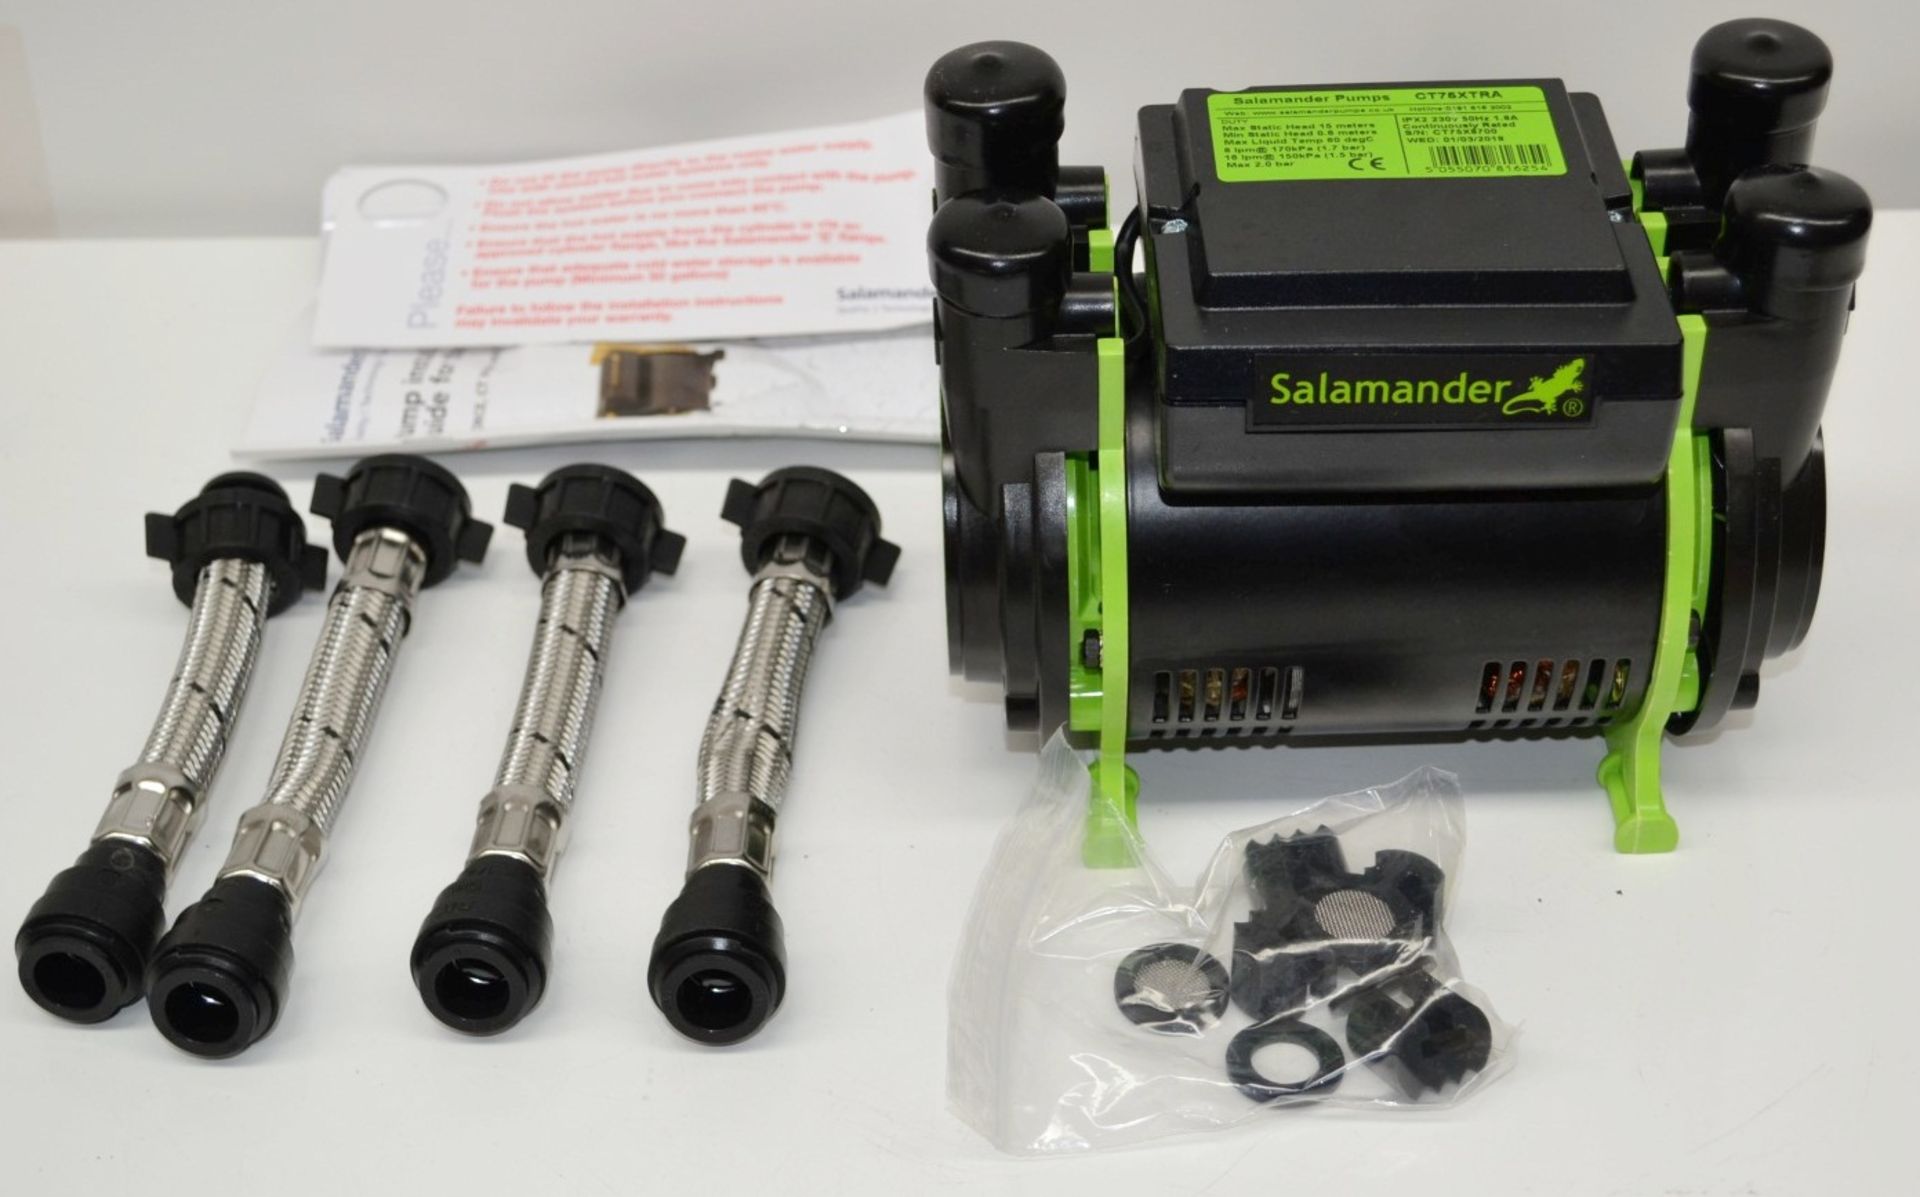 1 x Salamander CT75 Xtra 2.0 Bar Twin Positive Shower Pump - Ref: MBI017 - CL190 - Unused Boxed - Image 3 of 6